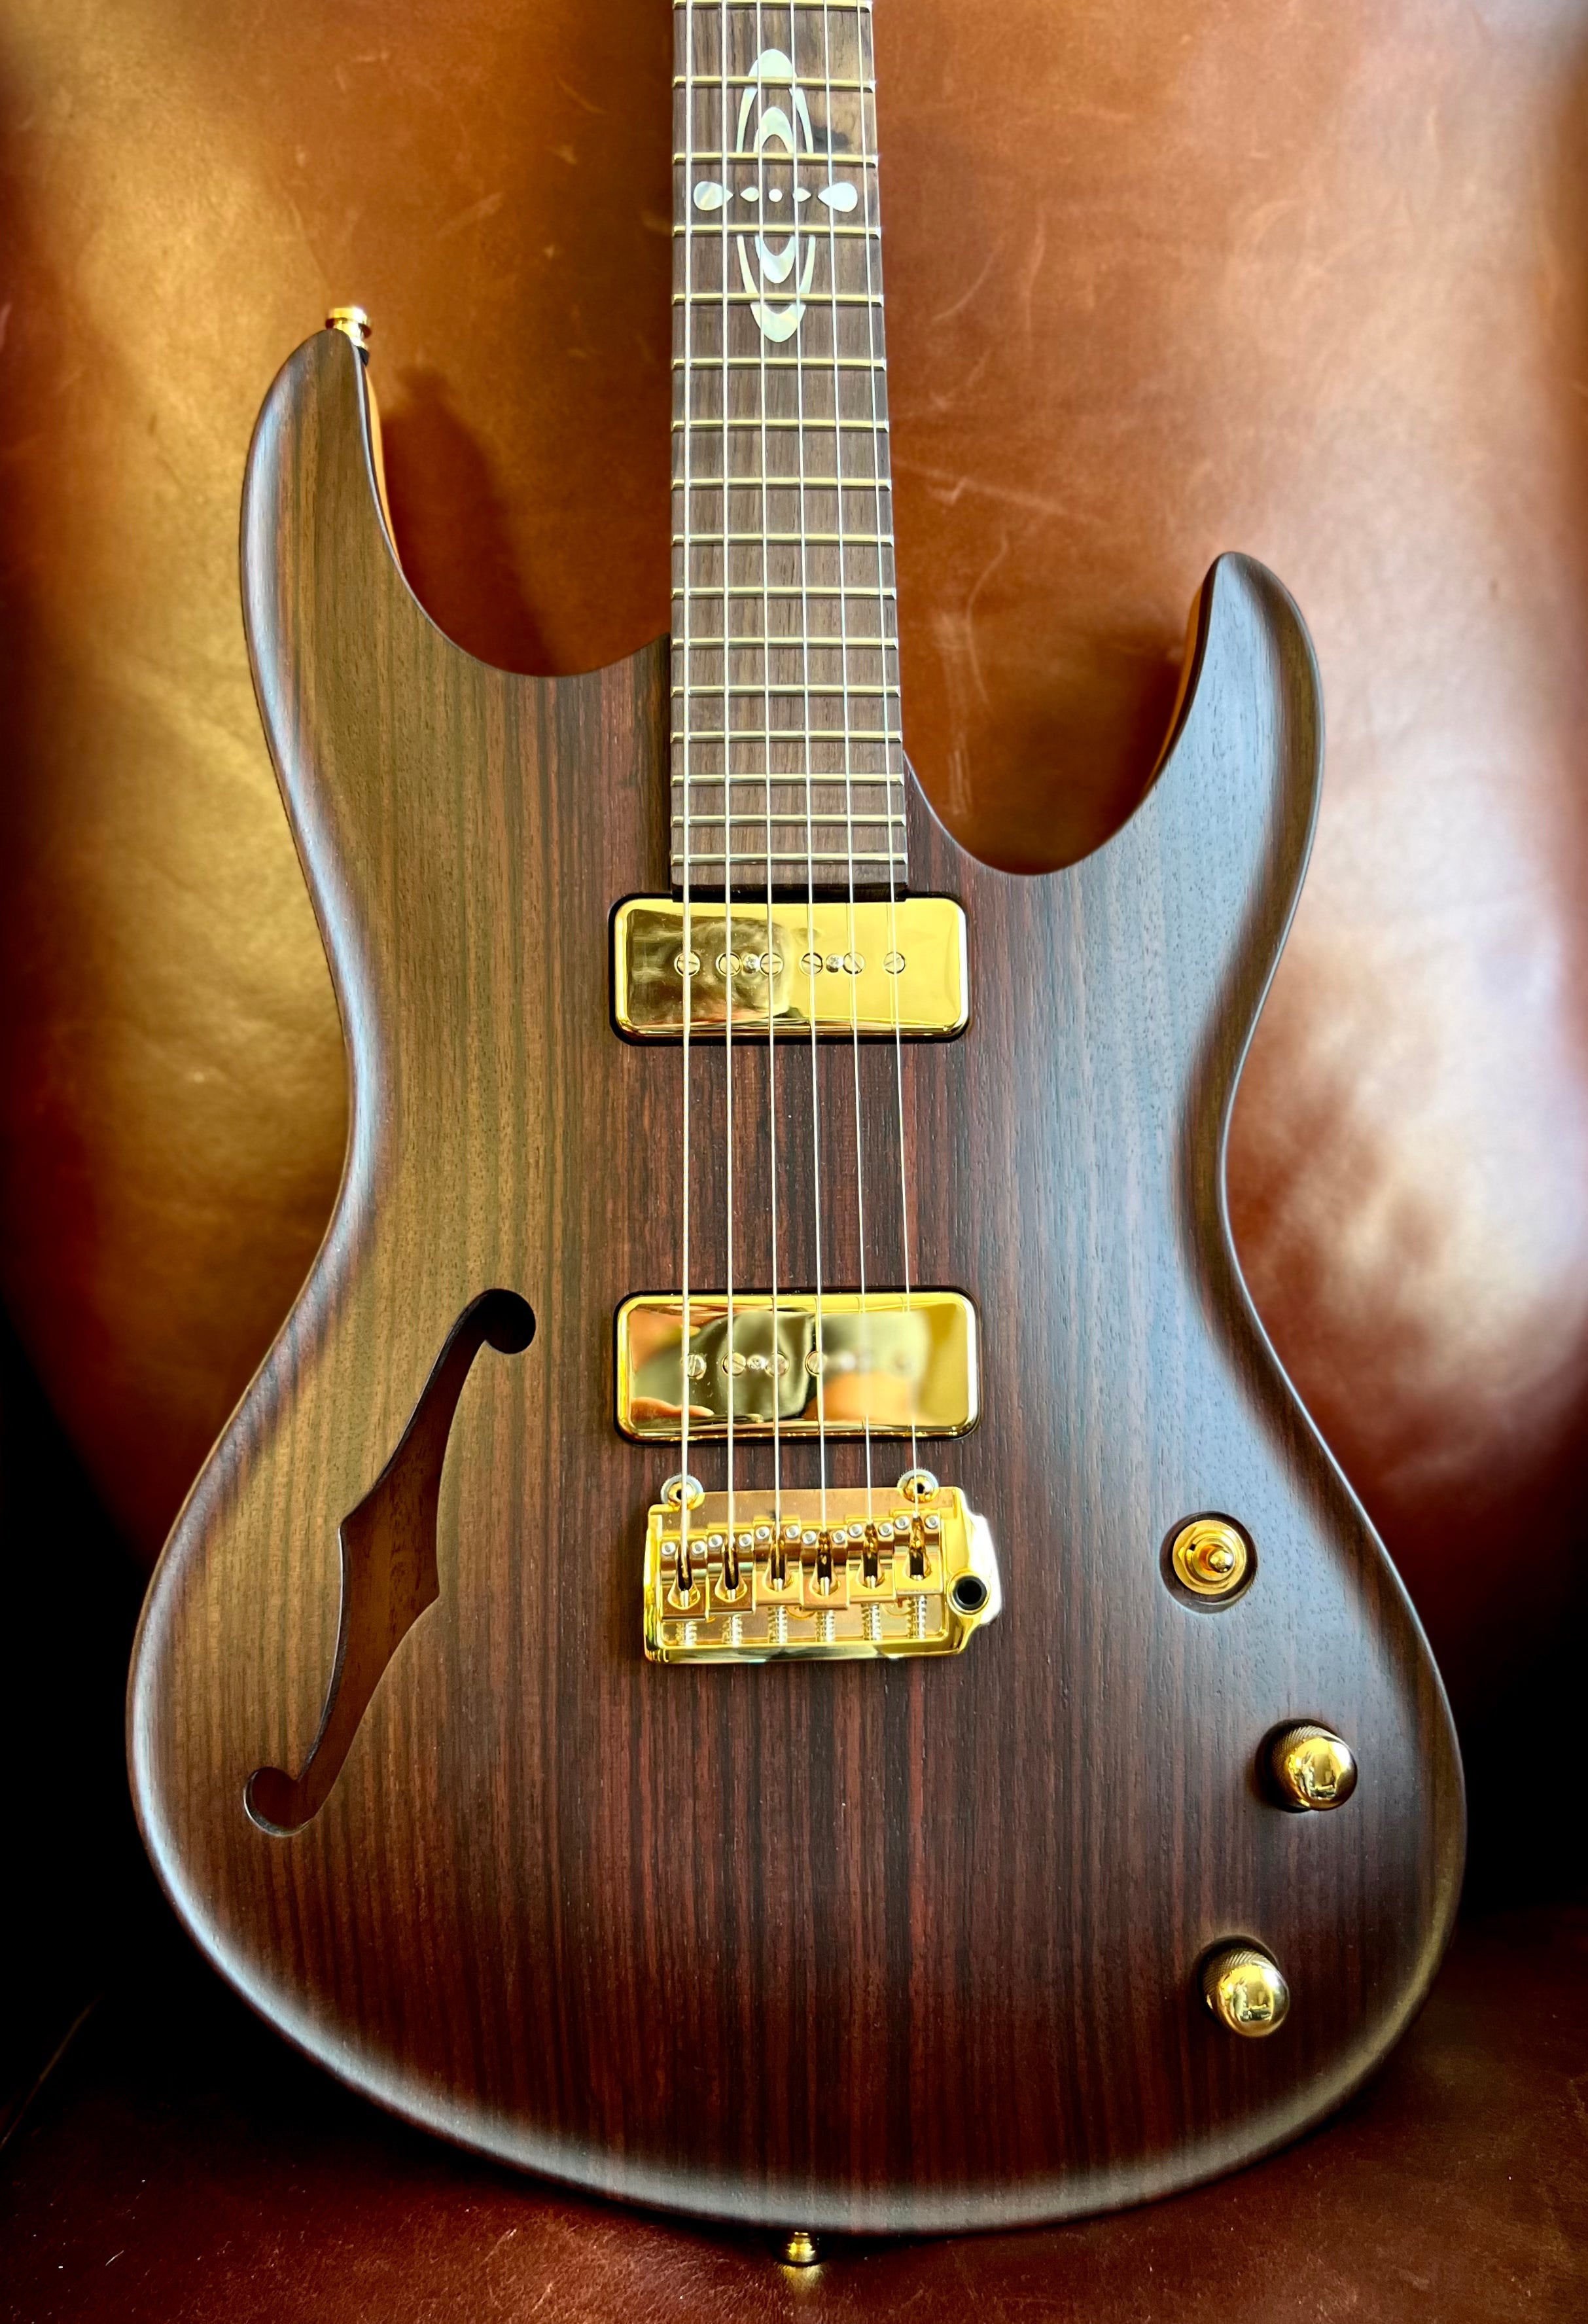 Valenti Nebula Semi Hollow All Rosewood, Electric Guitar for sale at Richards Guitars.